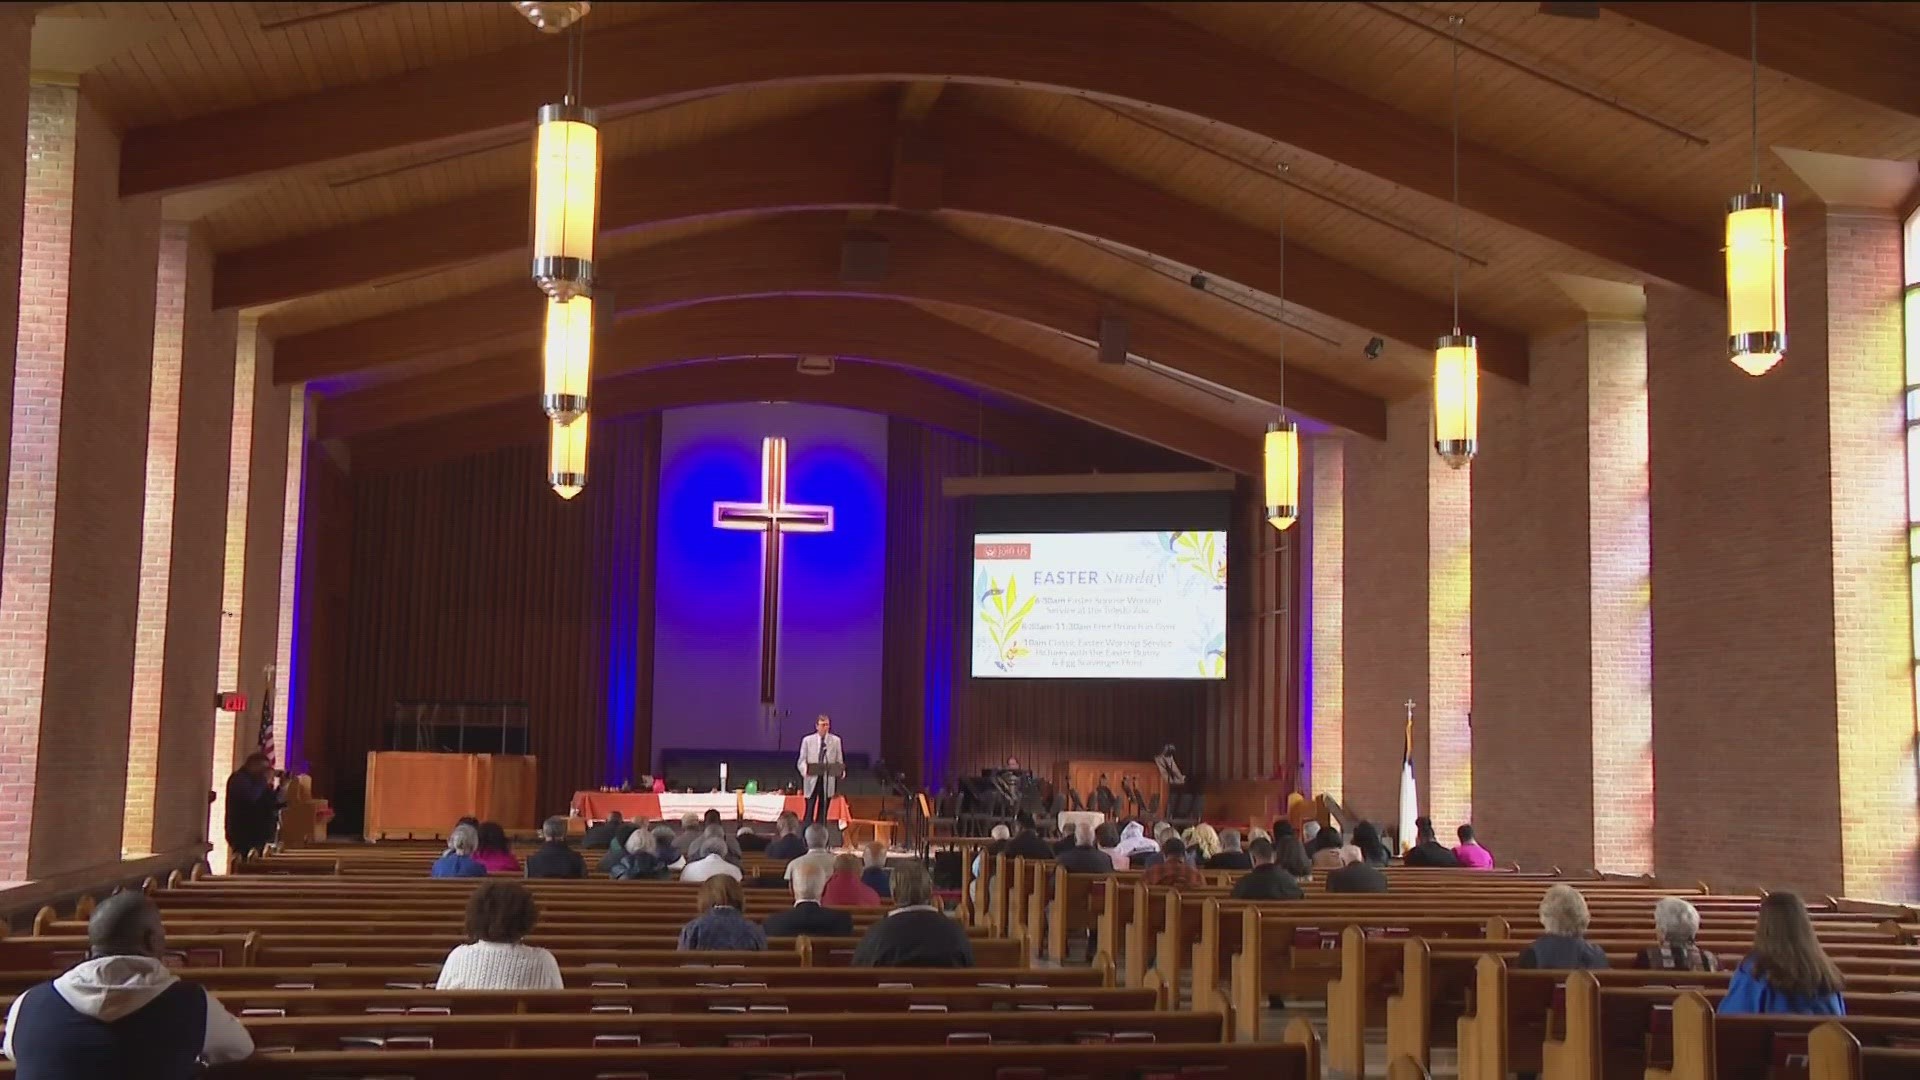 The coalition strayed from its normal meeting format to hold a service with other community leaders Thursday to raise awareness and pray for those lost to violence.